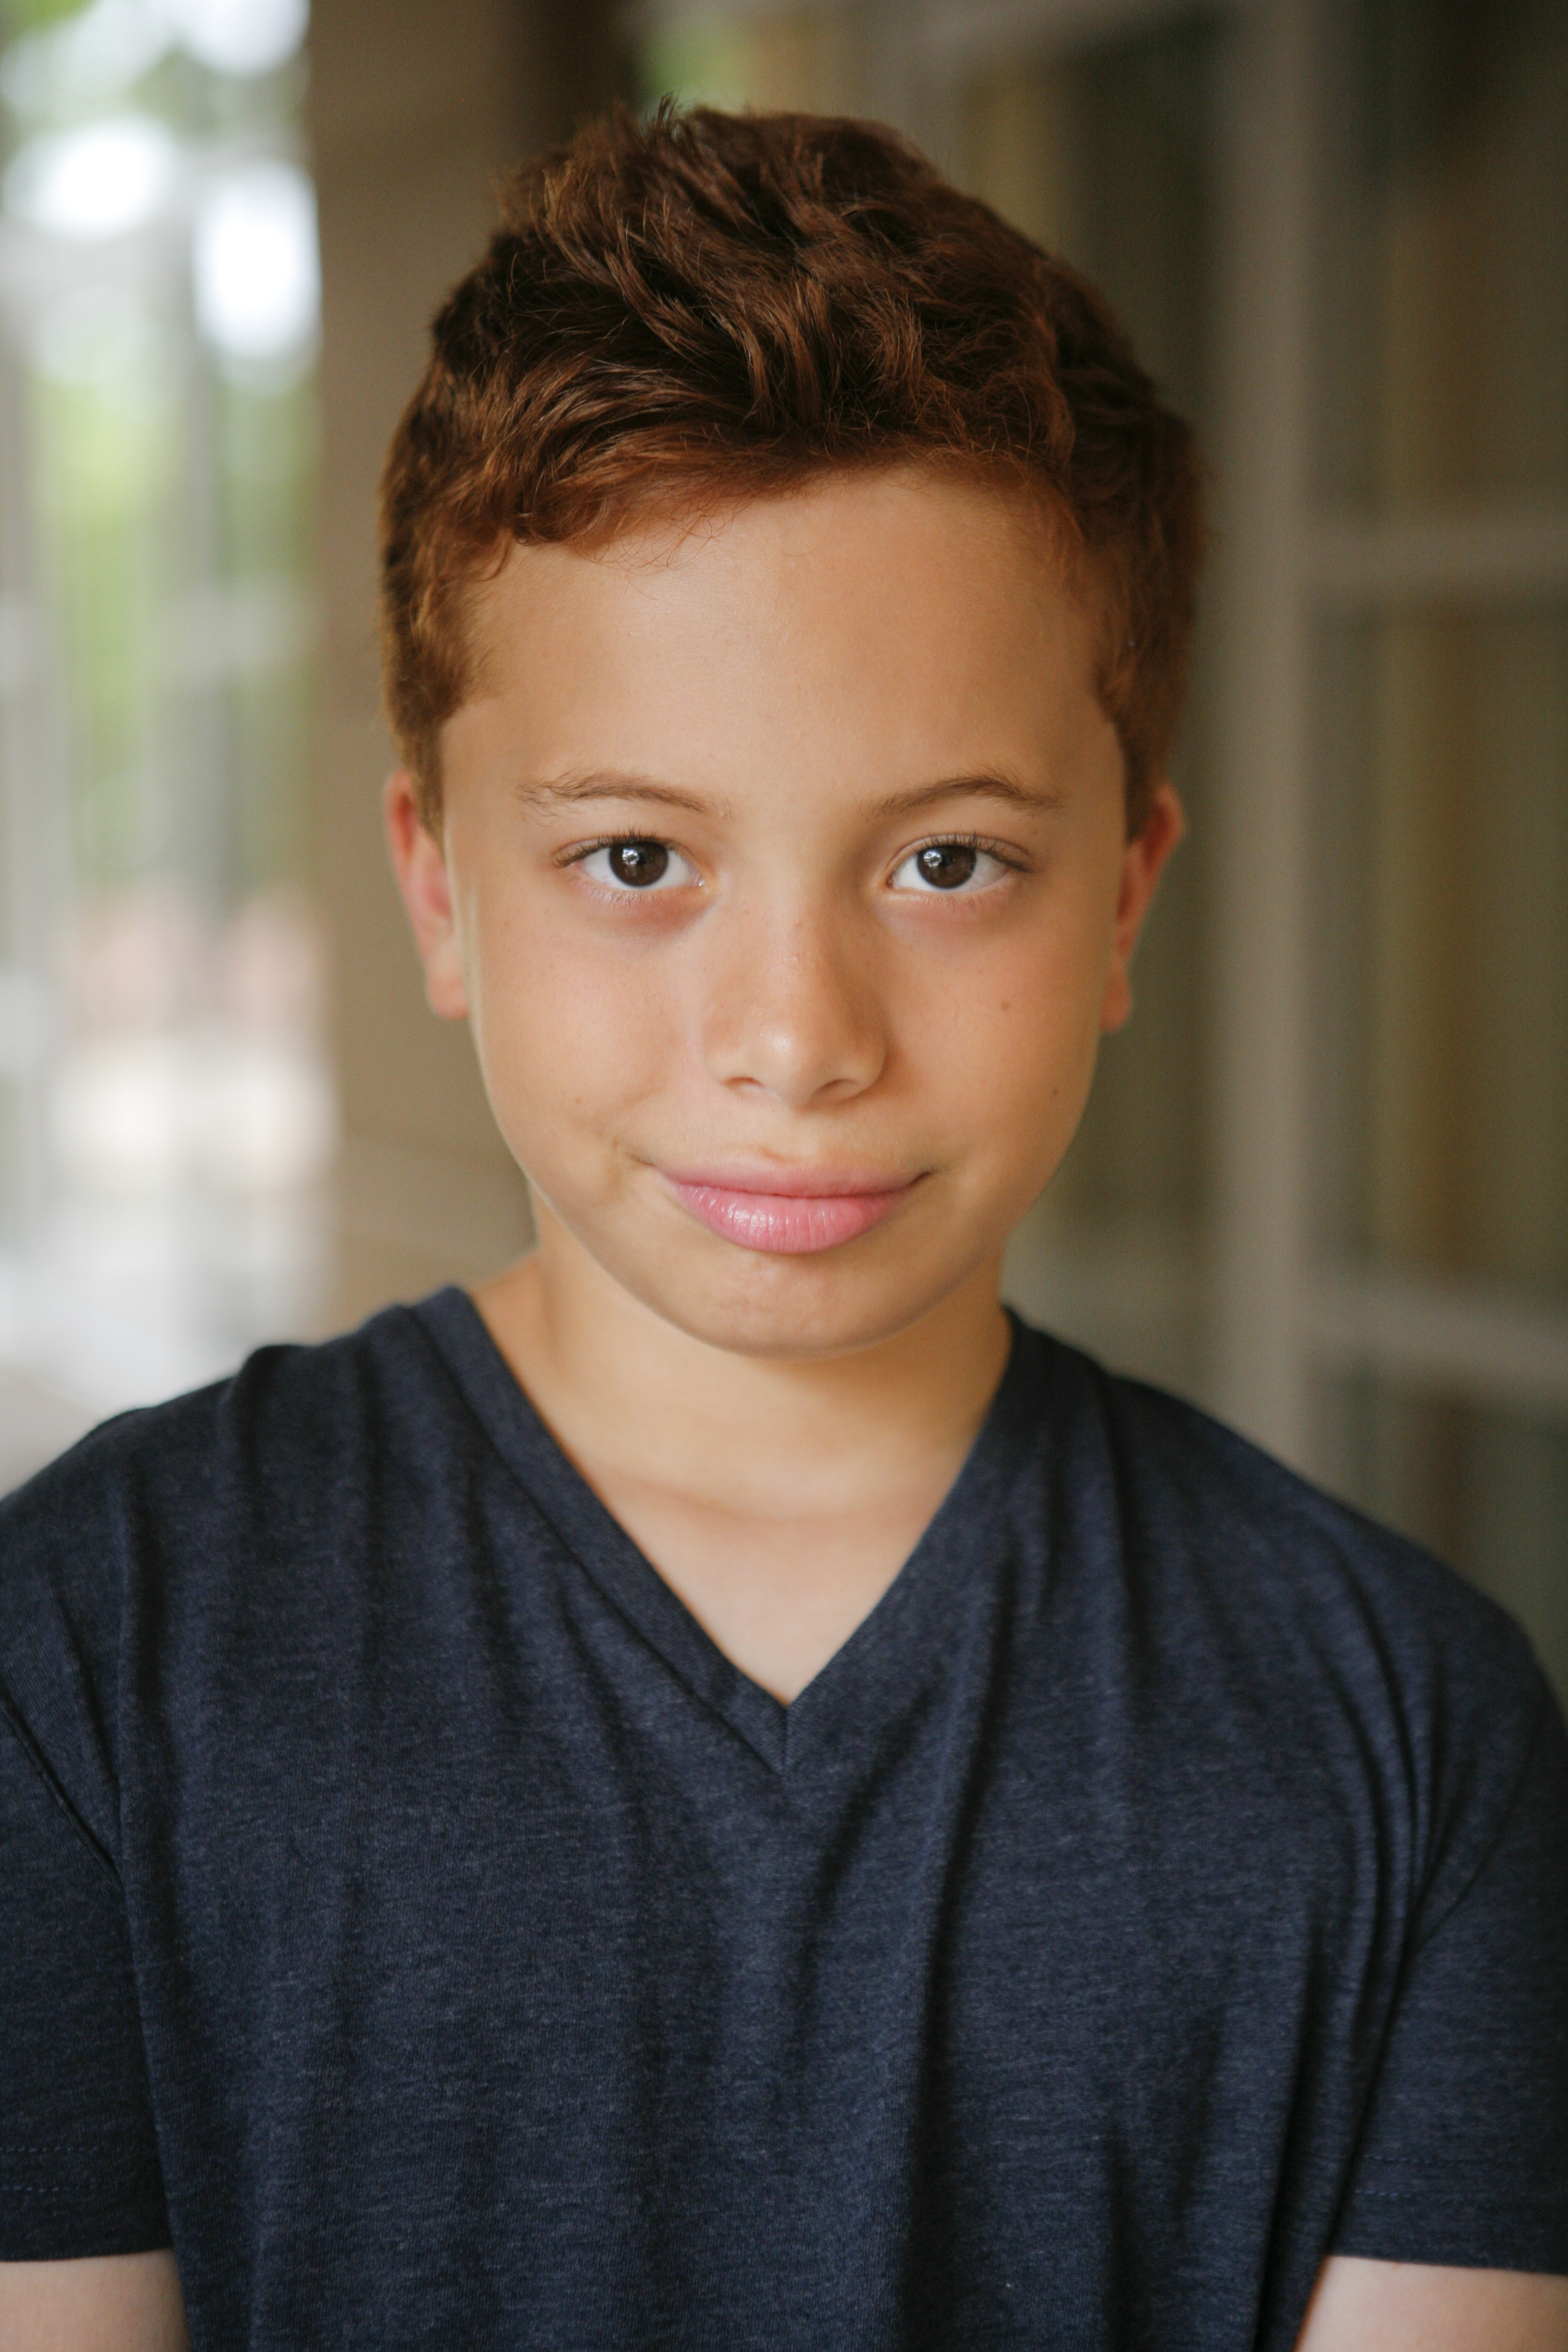 Samuel is 10 years old. Actor and Model